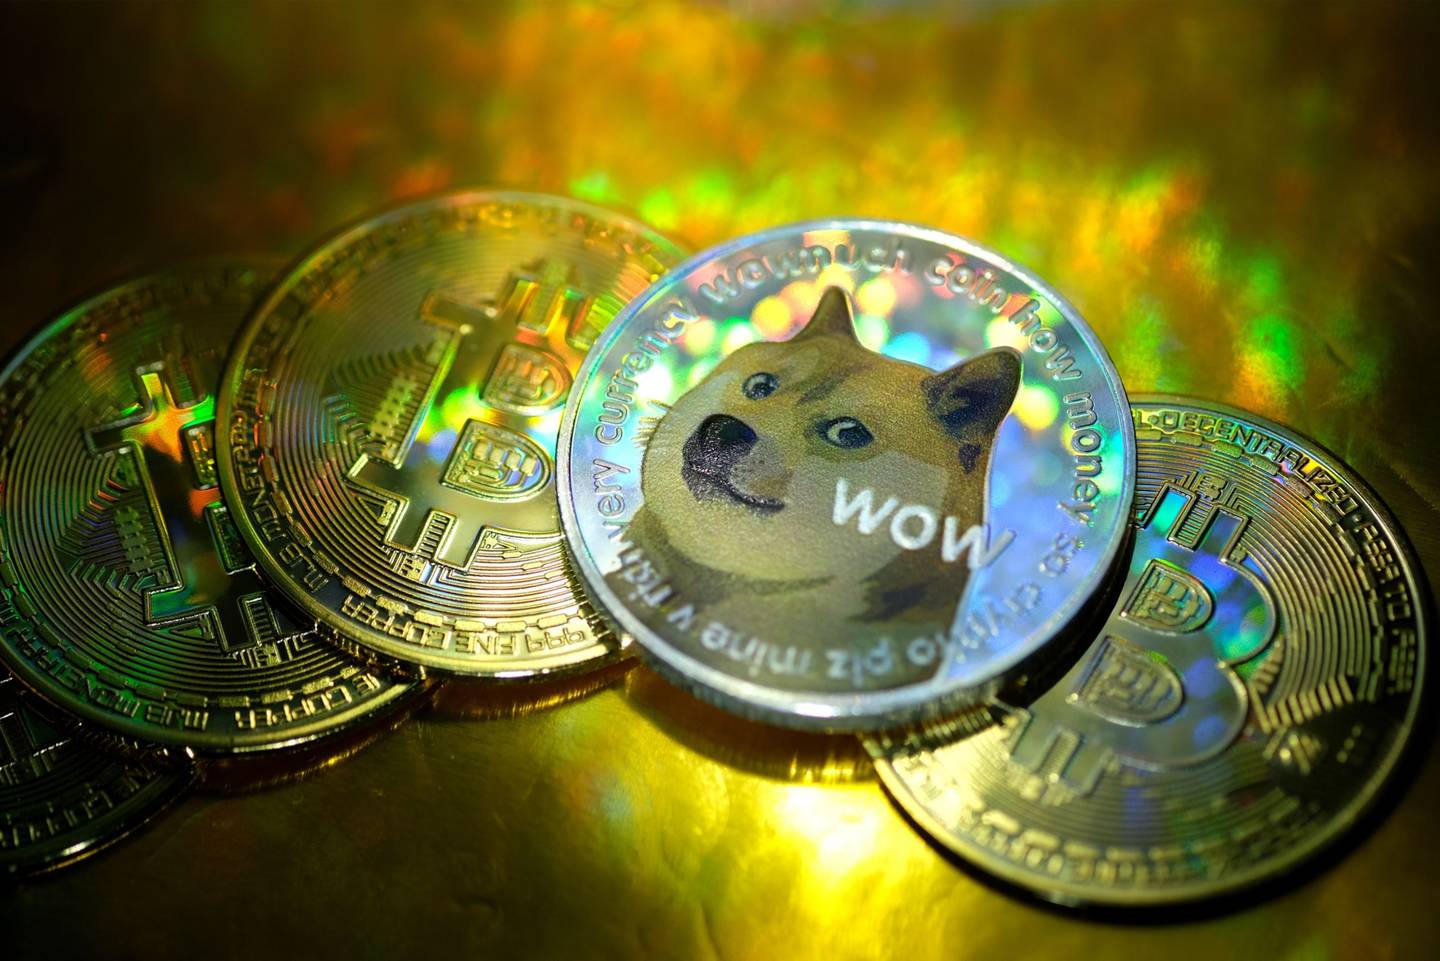 KATWIJK, NETHERLANDS - JANUARY 29: In this photo illustration, visual representations of digital cryptocurrencies, Dogecoin and Bitcoin are arranged on January 29, 2021 in Katwijk, Netherlands. (Photo by Yuriko Nakao/Getty Images)